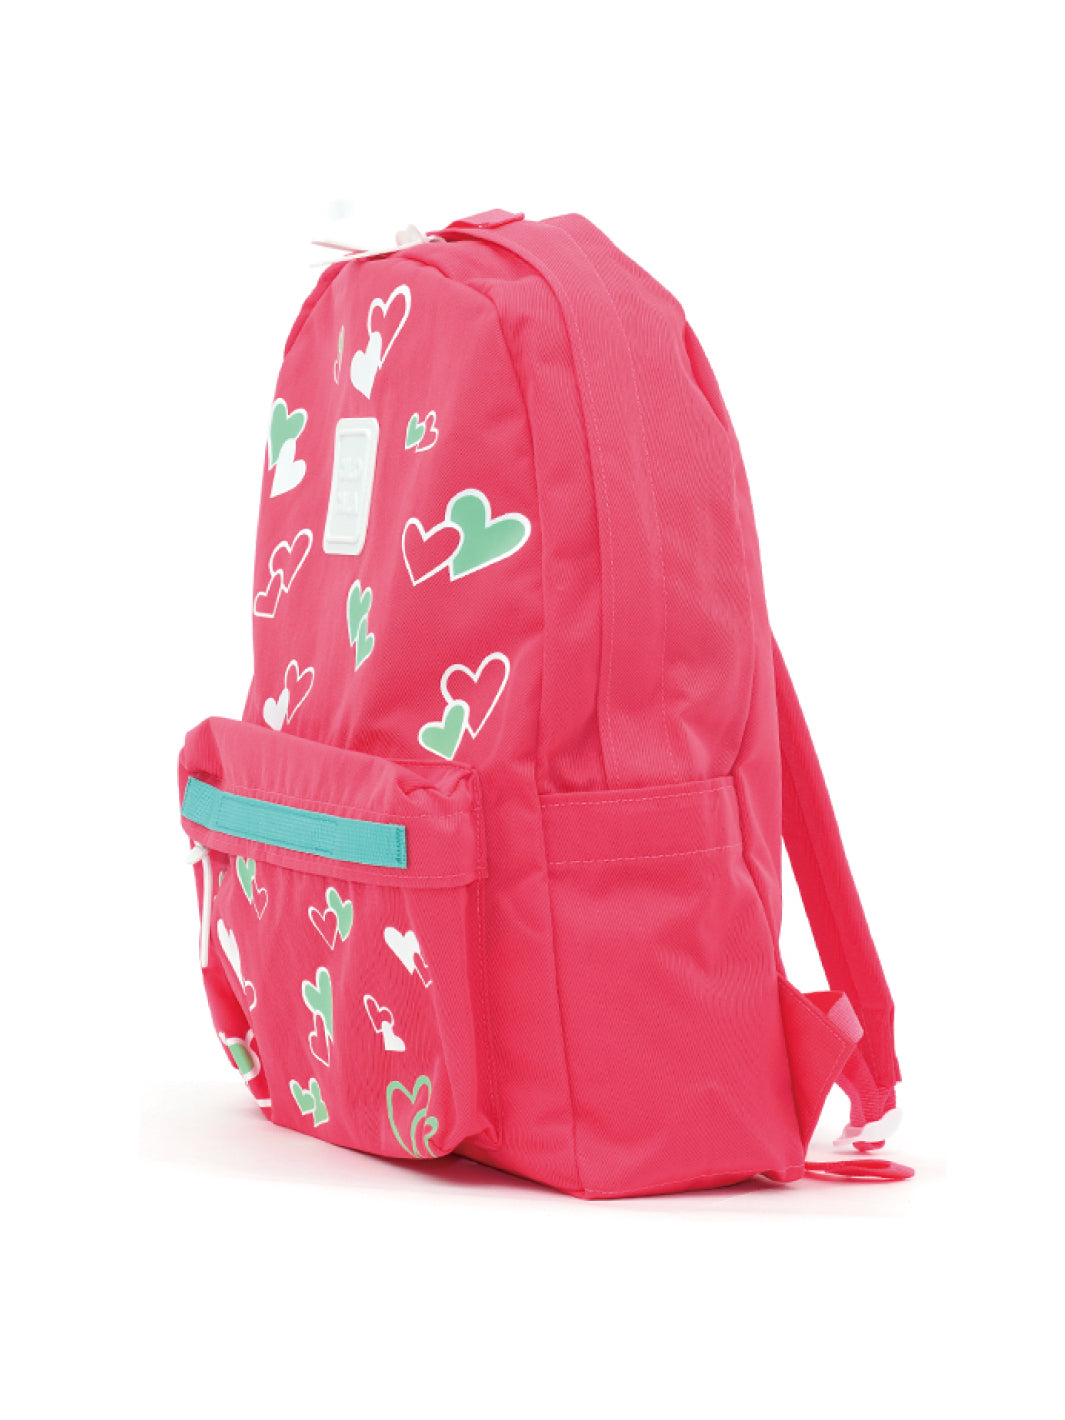 DOUBLE HEARTS BACKPACK (LARGE)